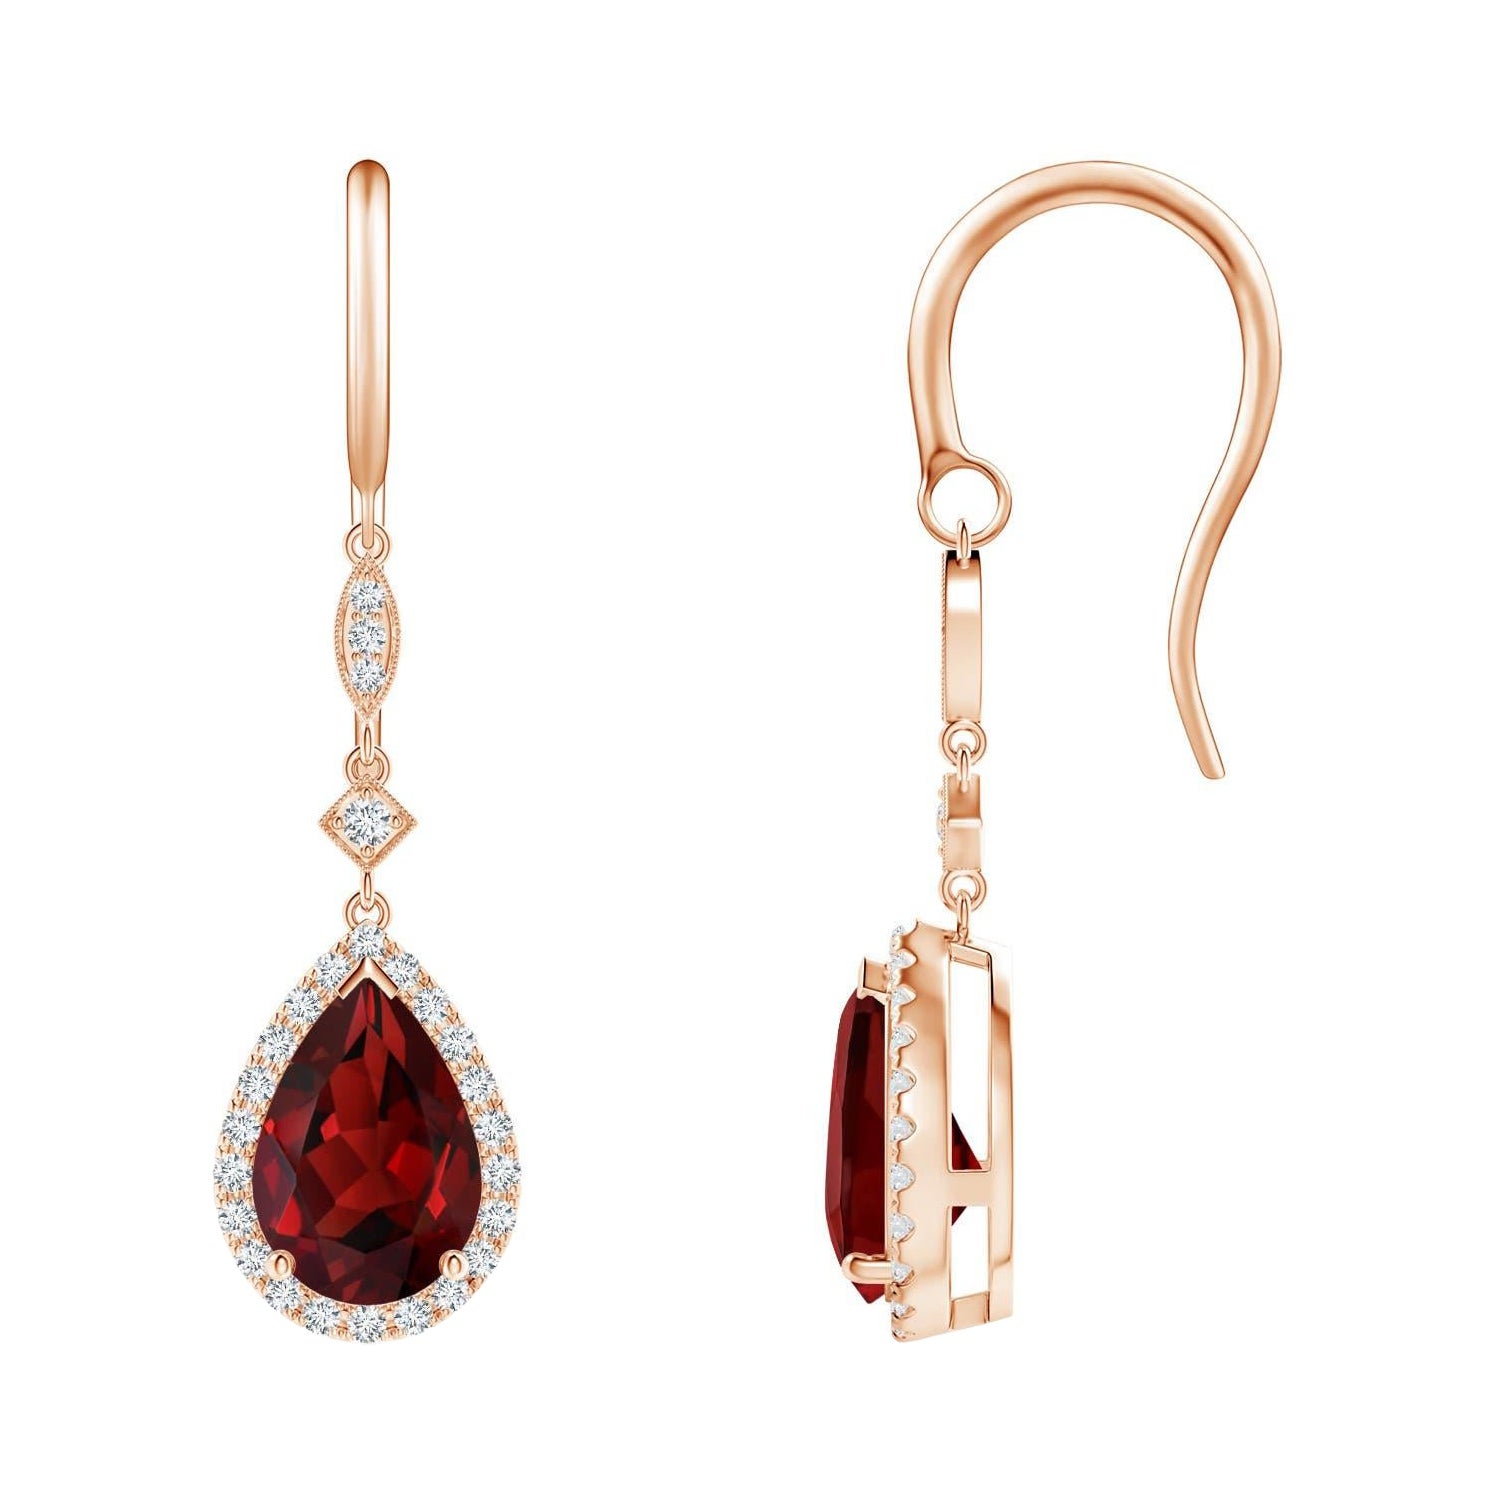 Natural Pear-Shaped 3ct Garnet Drop Earrings with Diamond in 14K Rose Gold